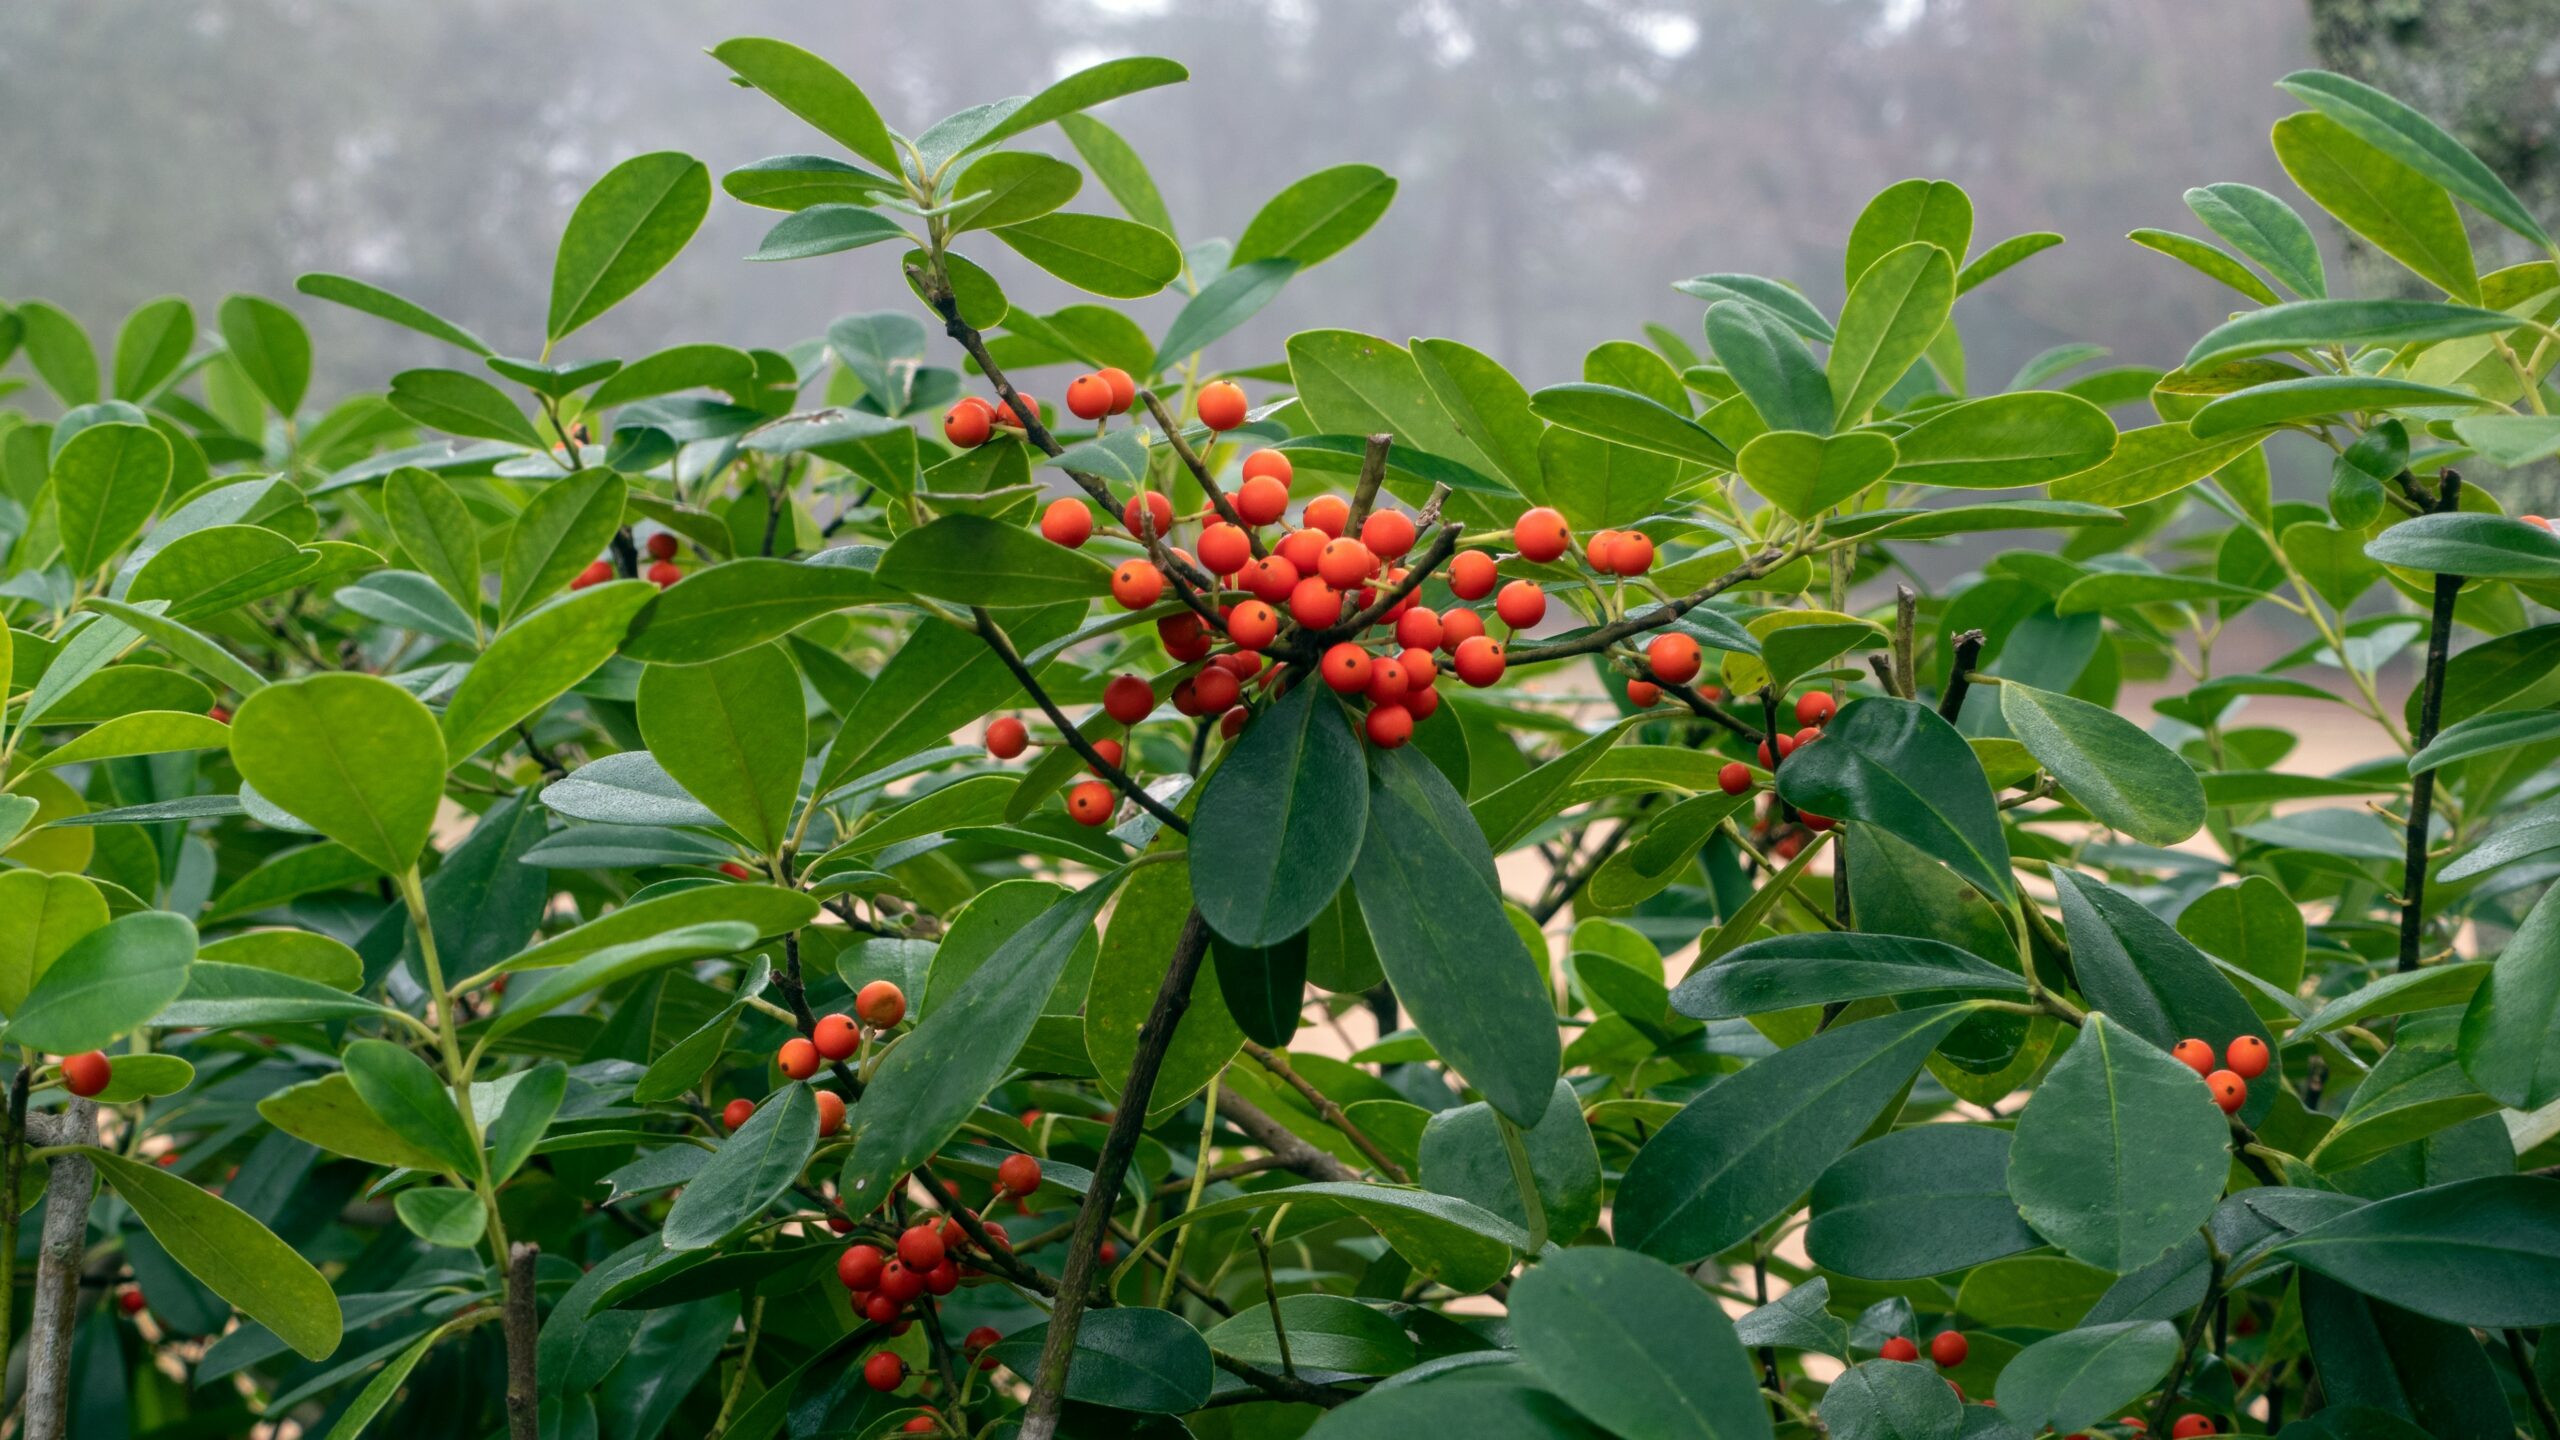 Close-up shot of orange holly berries on a bush in a forest covered by dense fog